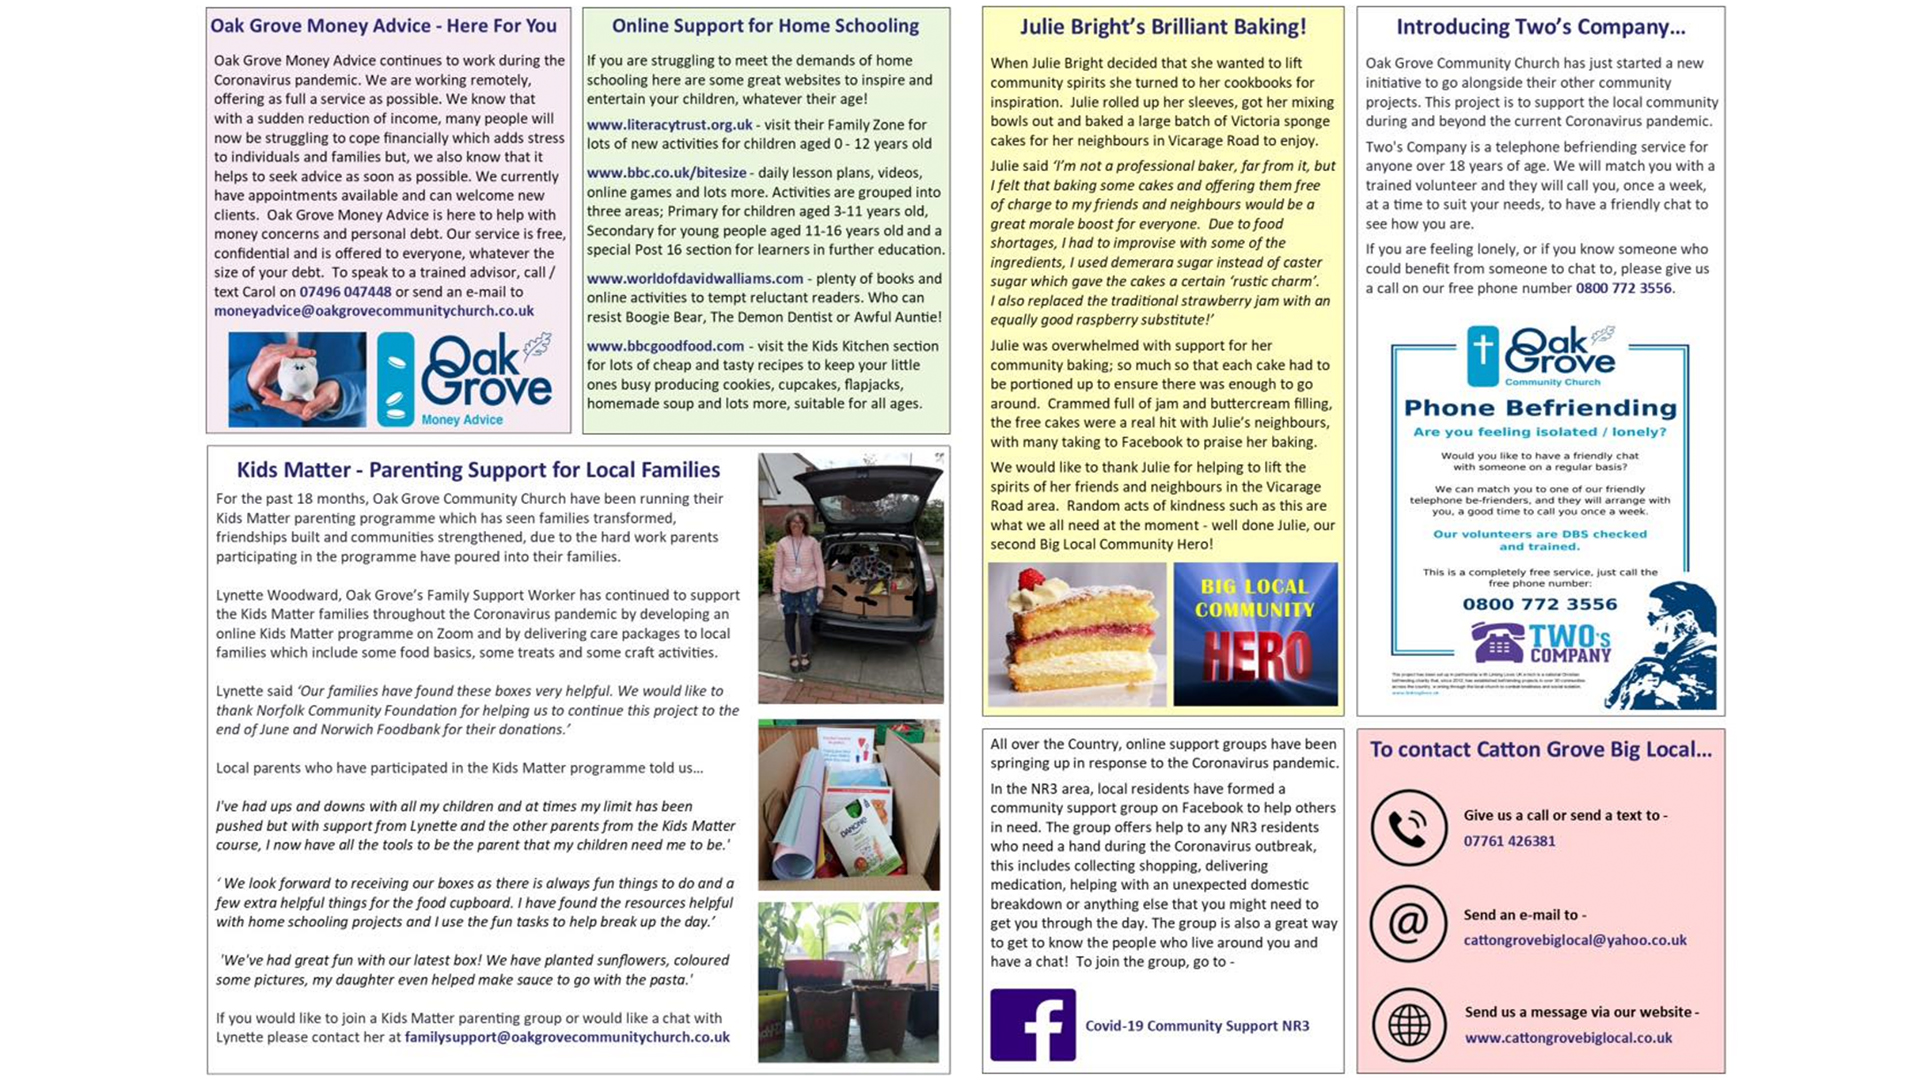 Catton Grove May 2020 Newsletter